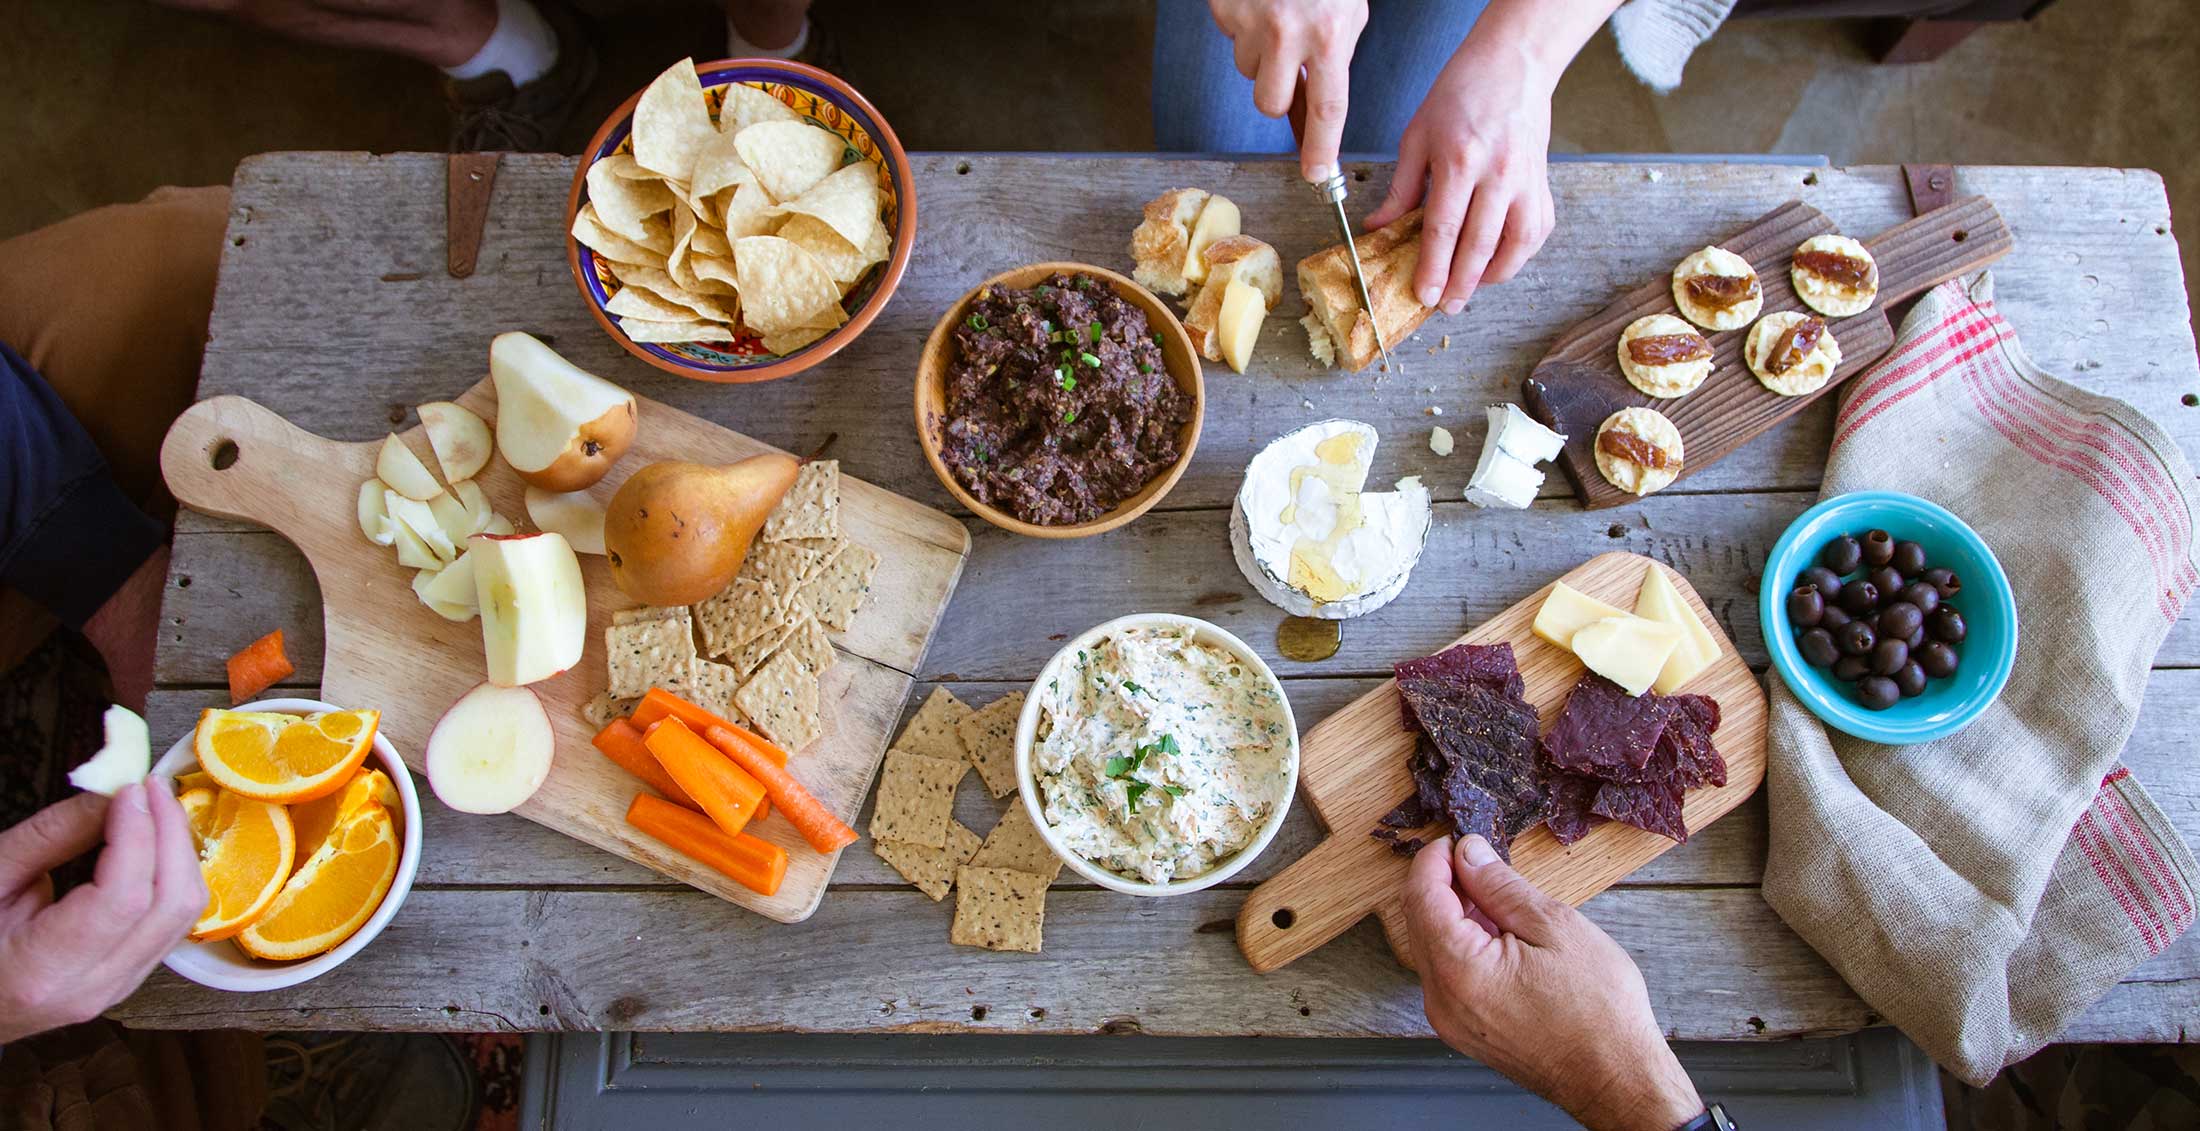 Hands reach across a wooden table to pick up bites of Patagonia Provisions organic snacks and appetizers in bowls and on cutting boards for a shared meal